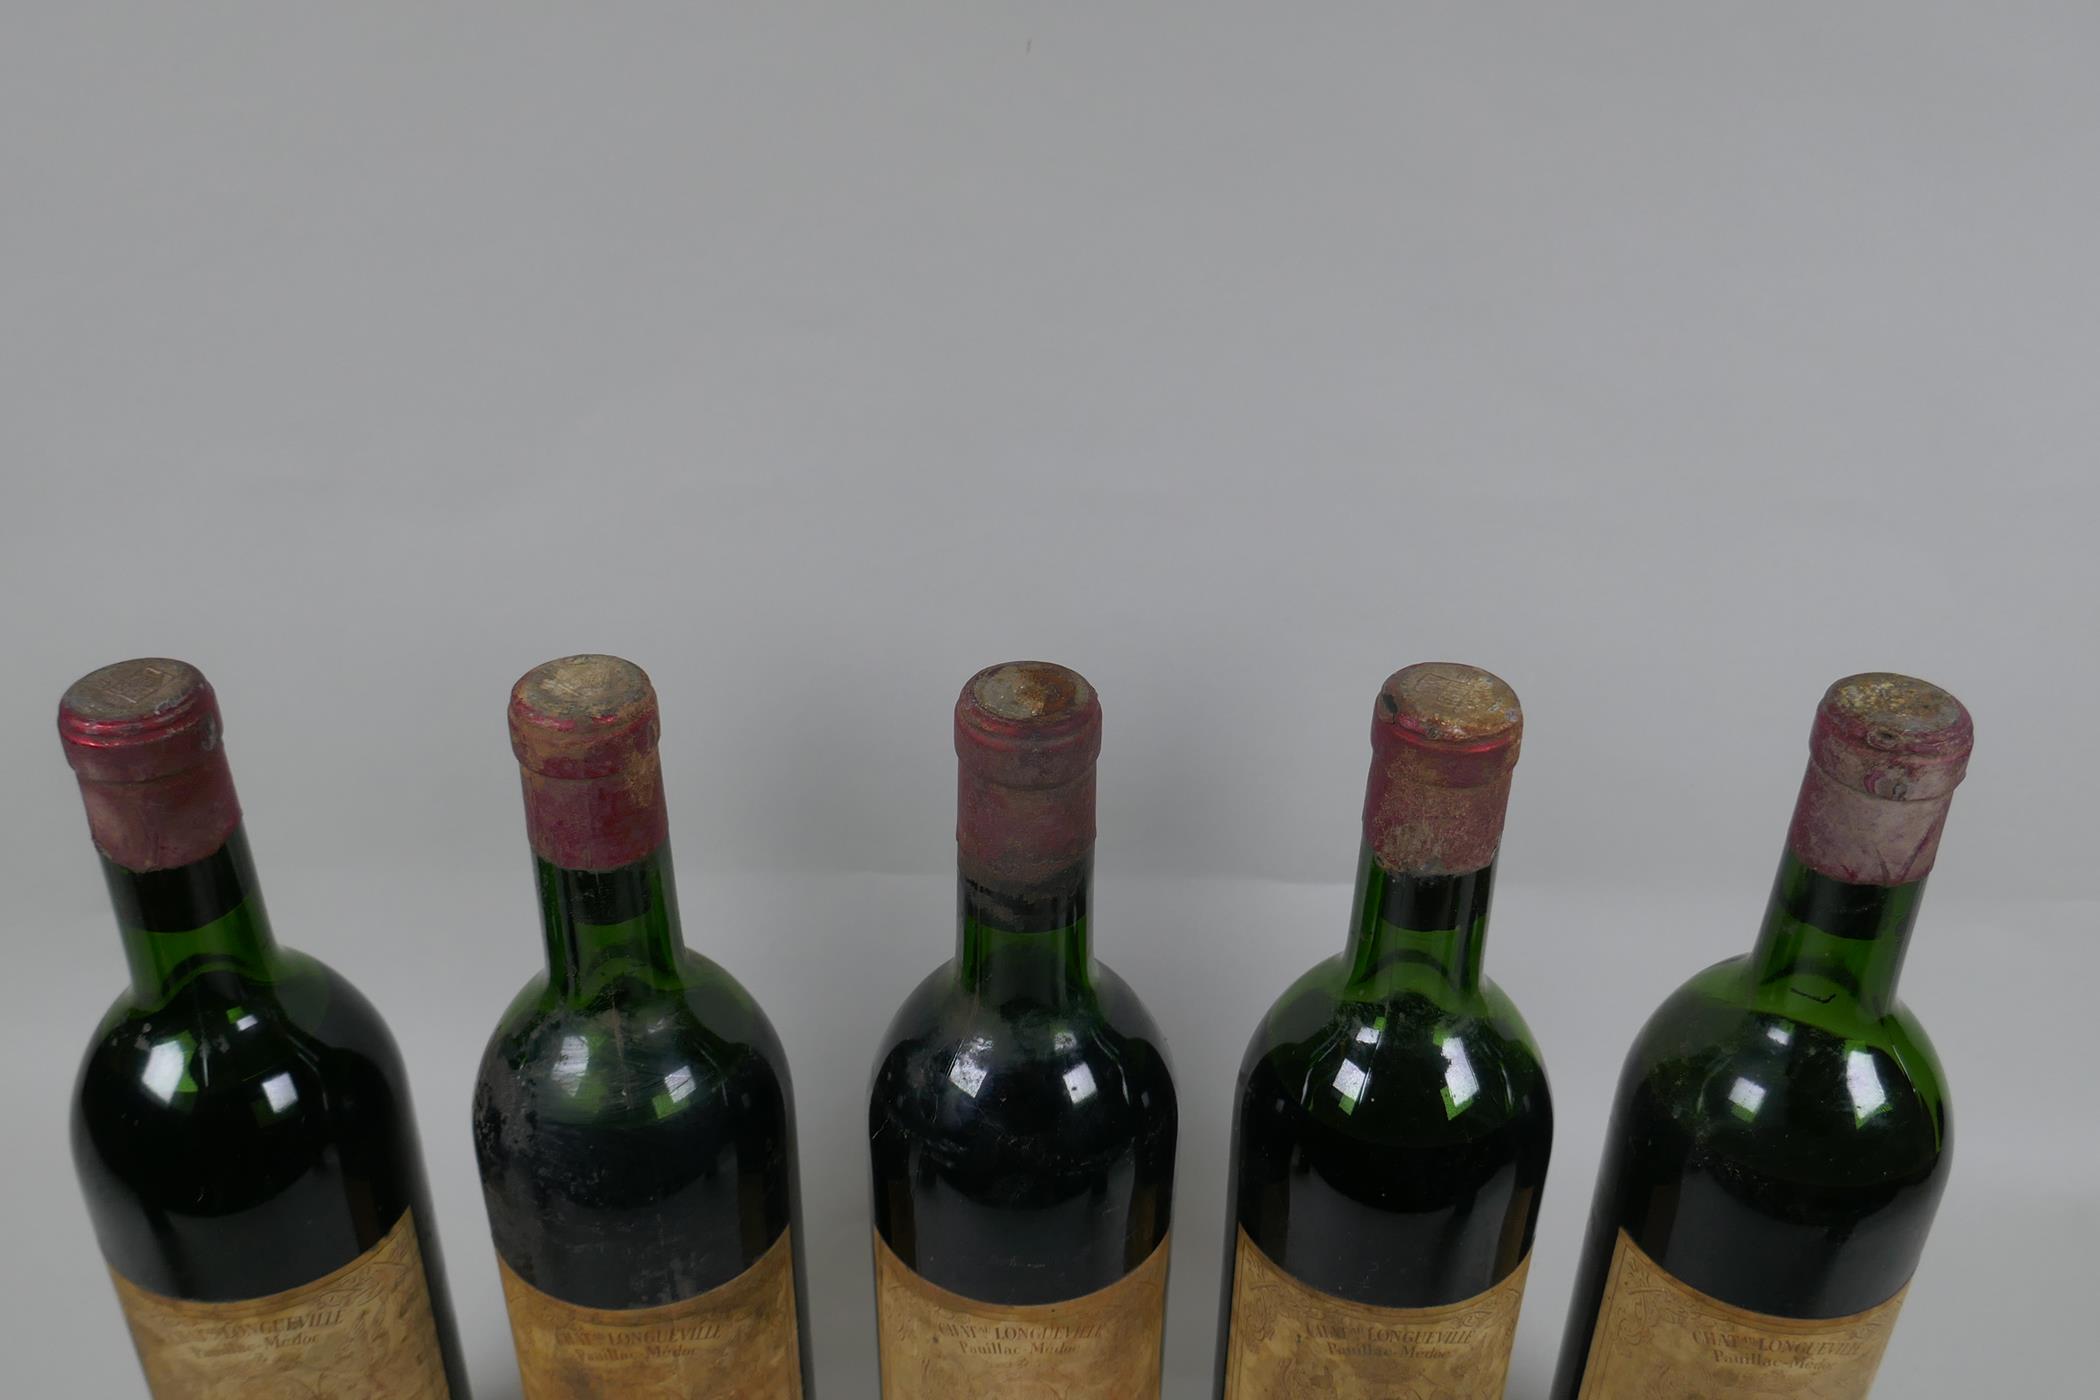 Five bottles of Chateau Pichon Baron, Pauillac, Gran Cru Classe 1960, together with two bottles of - Image 4 of 5